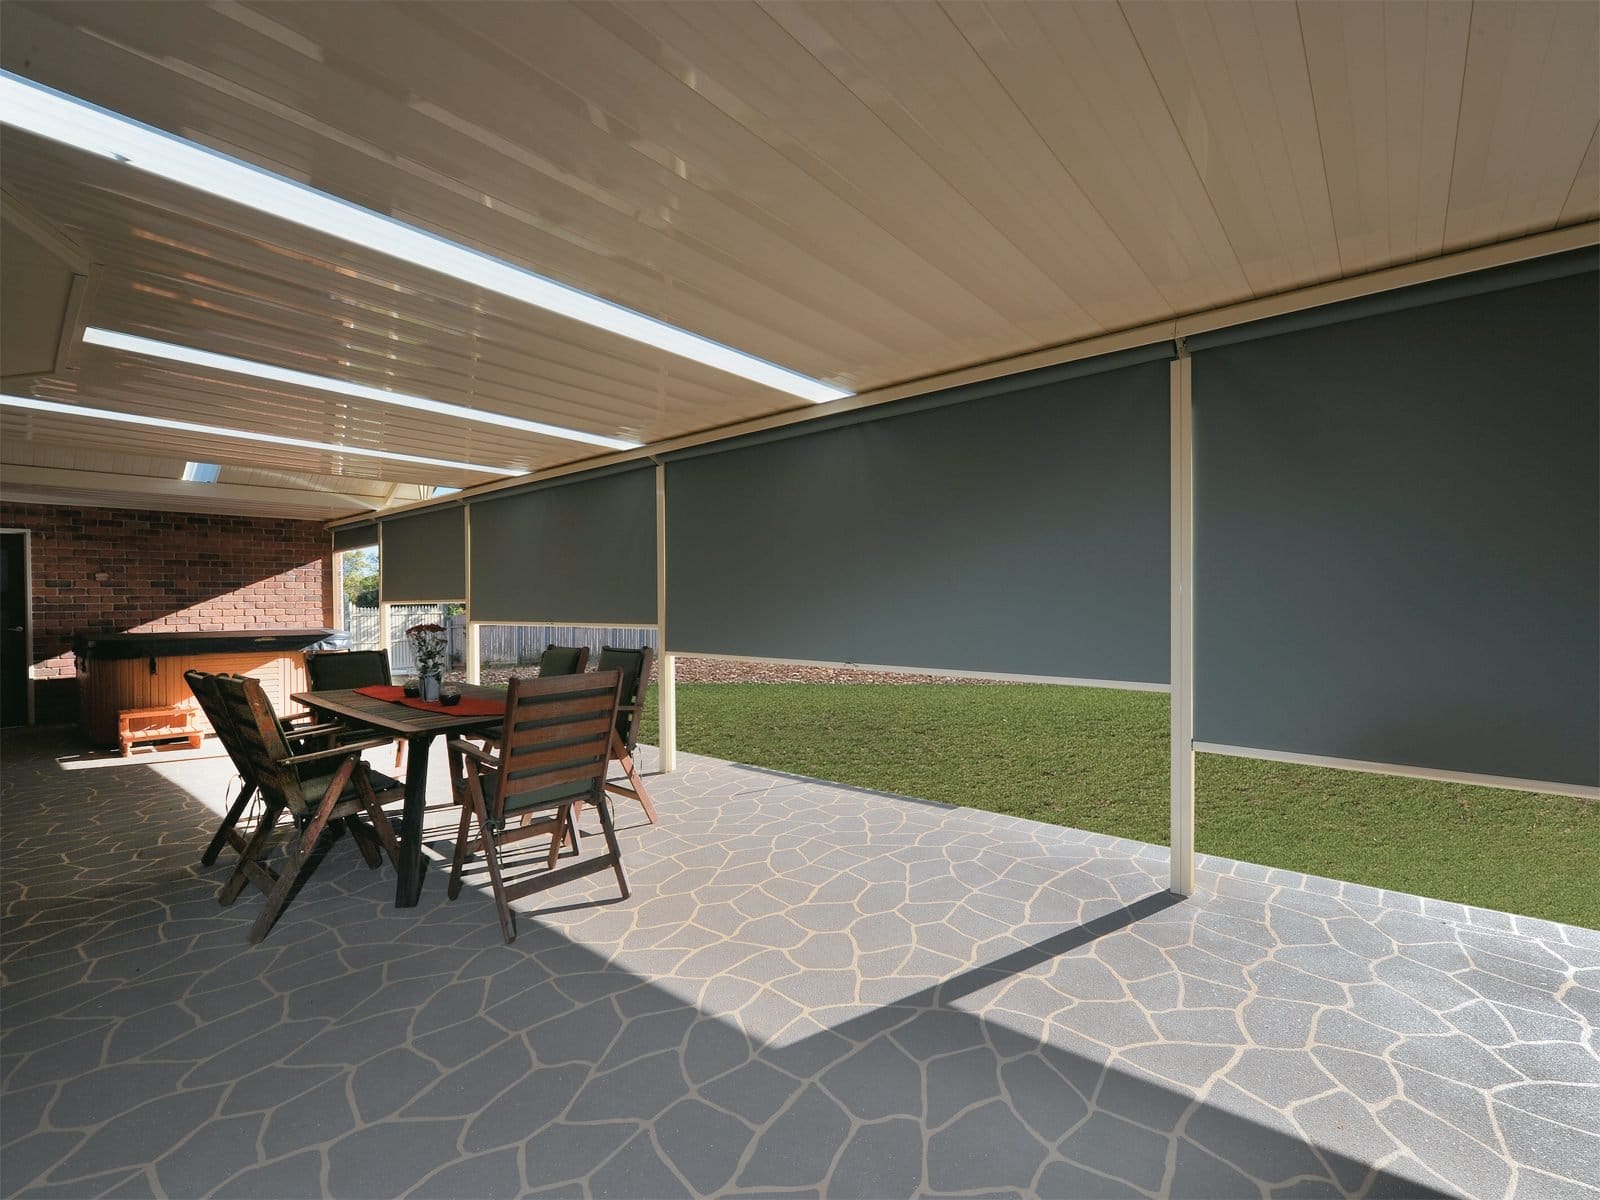 Patio with lights at night set up under retractable roof by Undercover Blinds and Awnings in Melbourne